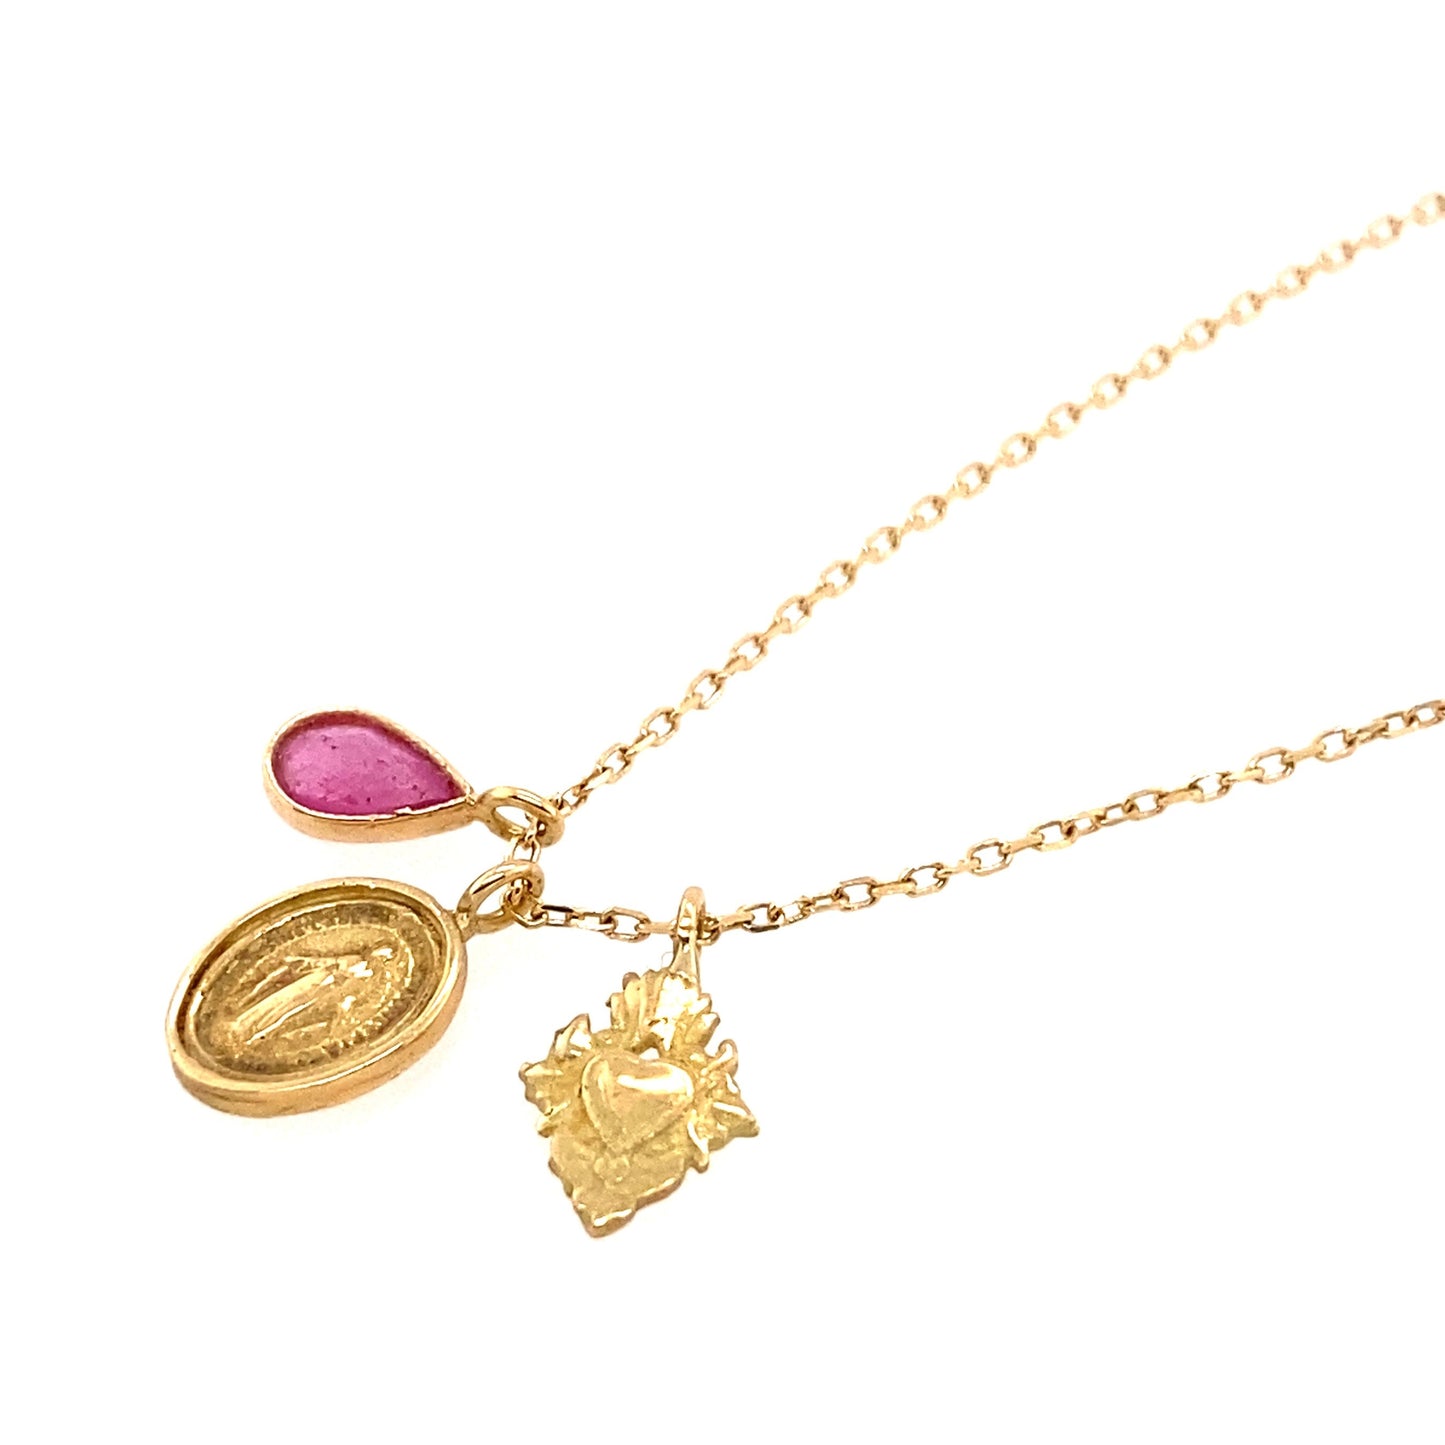 Perry De La Rosa 18kt Yellow Gold Ruby Medal Charm Necklace